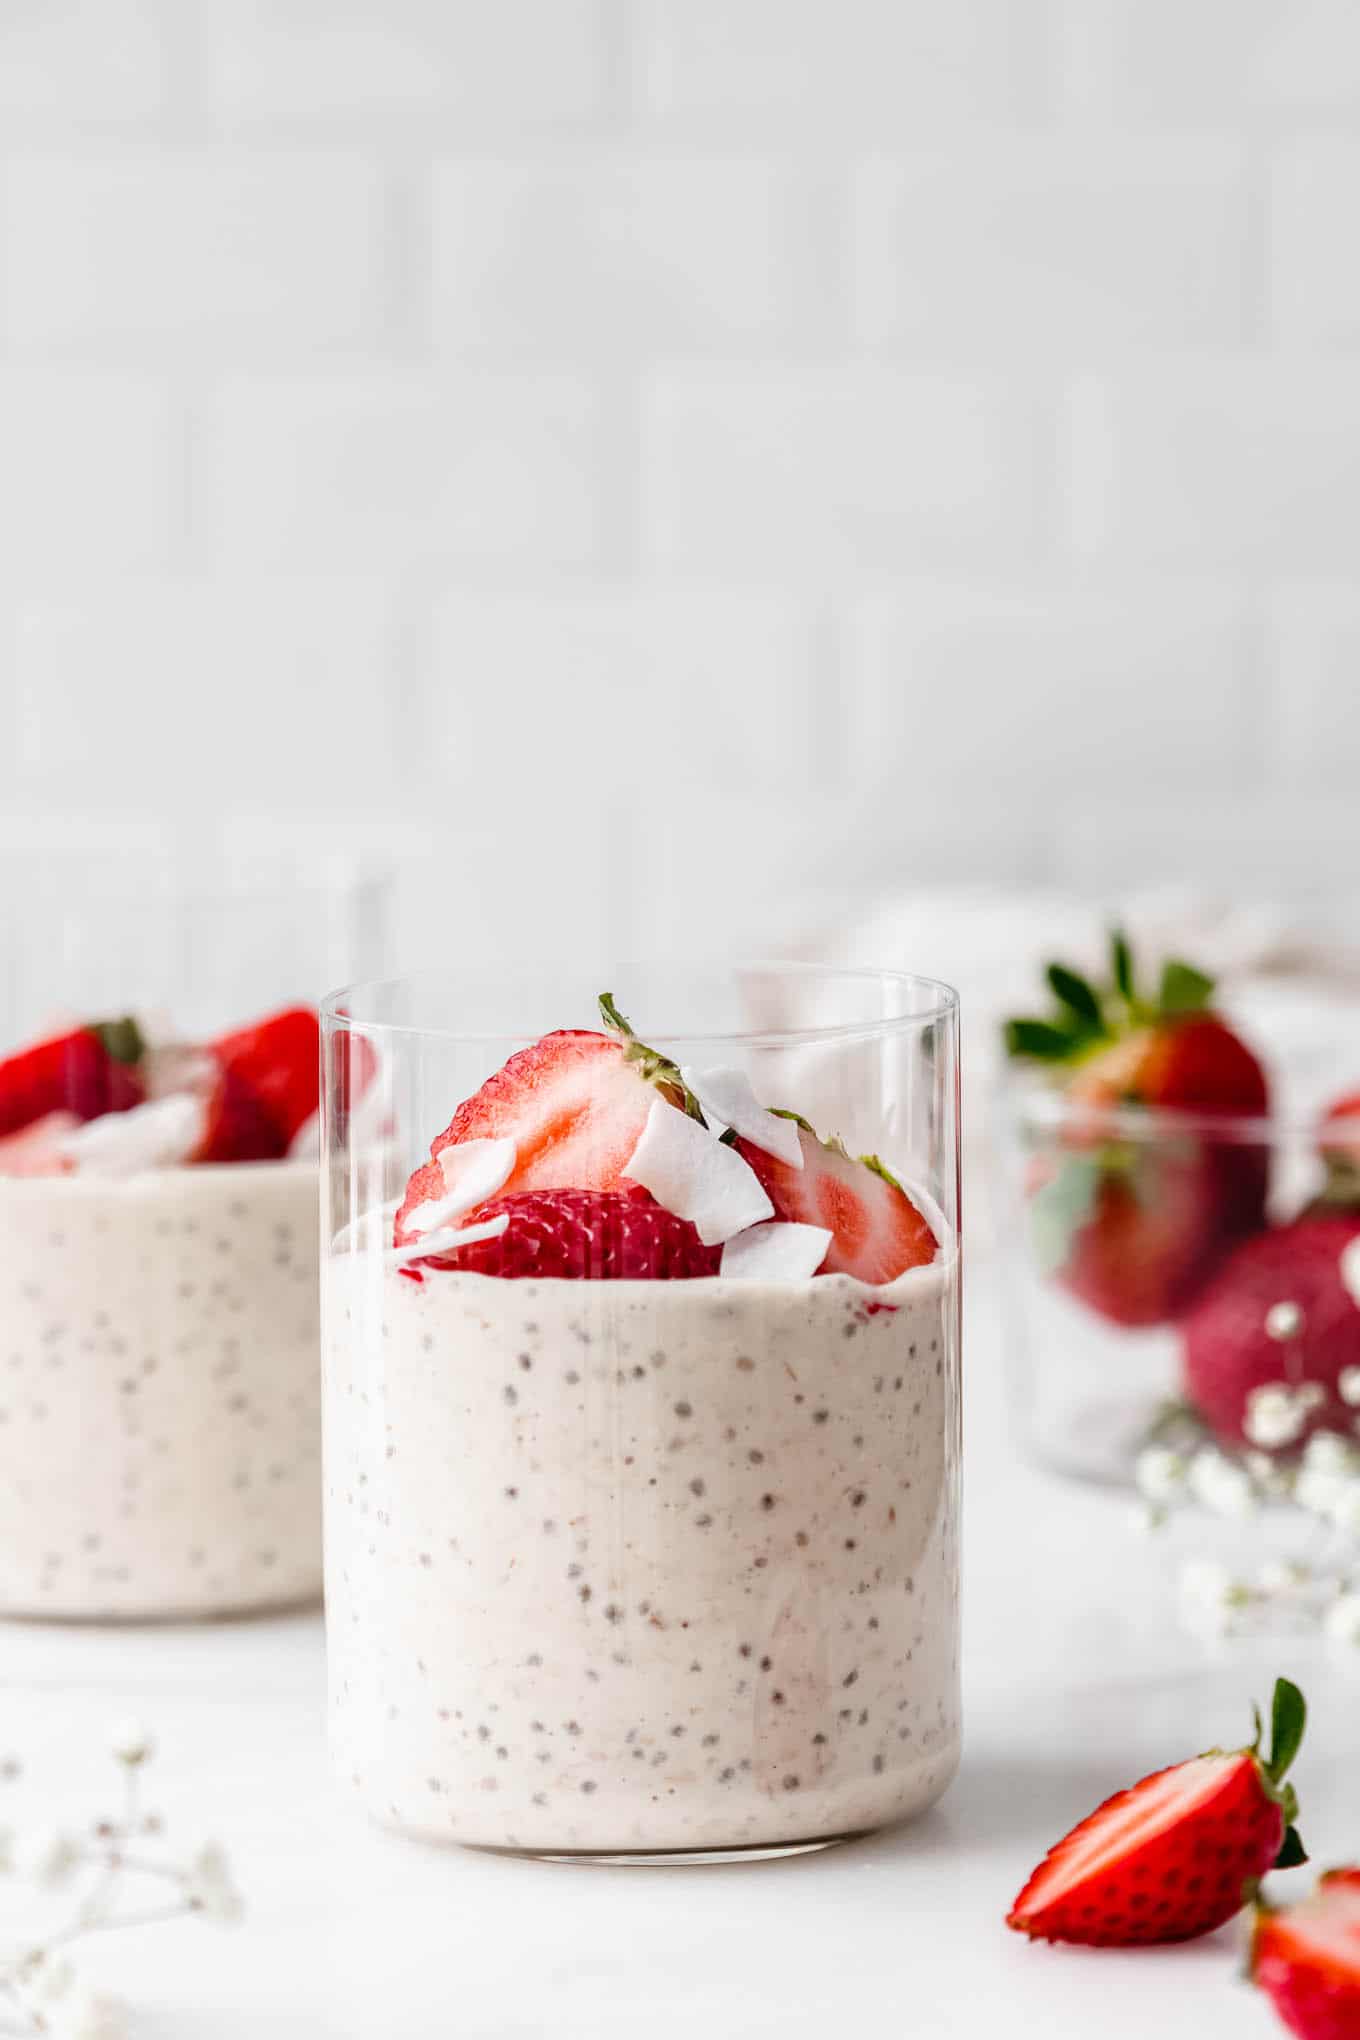 Protein Overnight Oats - Pinch of Wellness